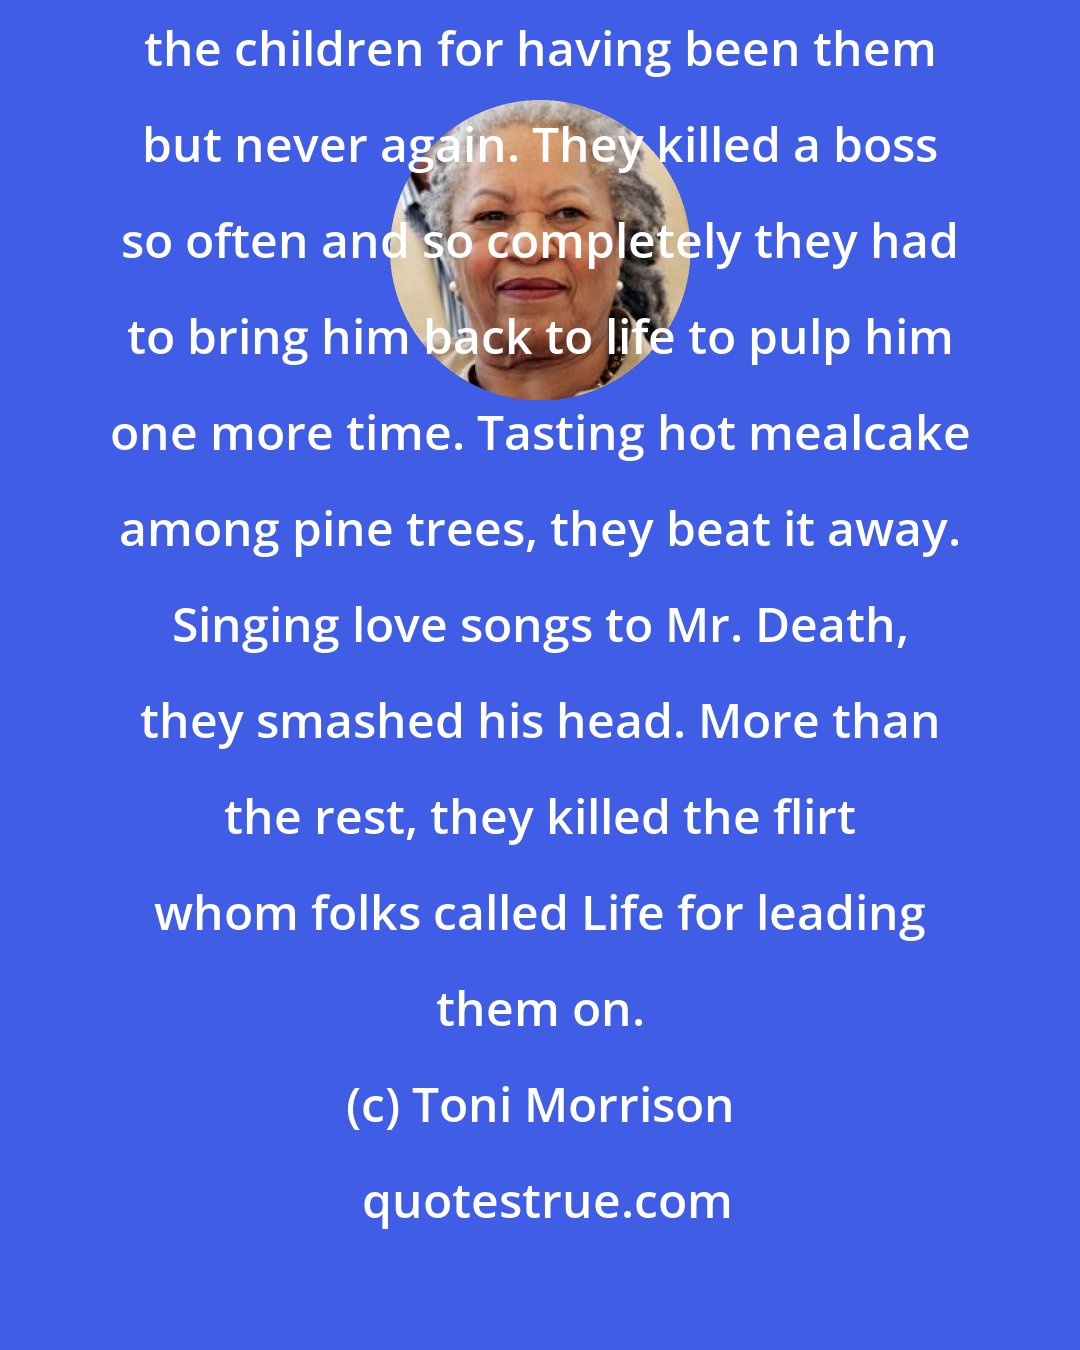 Toni Morrison: And they beat. The women for having known them and no more, no more; the children for having been them but never again. They killed a boss so often and so completely they had to bring him back to life to pulp him one more time. Tasting hot mealcake among pine trees, they beat it away. Singing love songs to Mr. Death, they smashed his head. More than the rest, they killed the flirt whom folks called Life for leading them on.